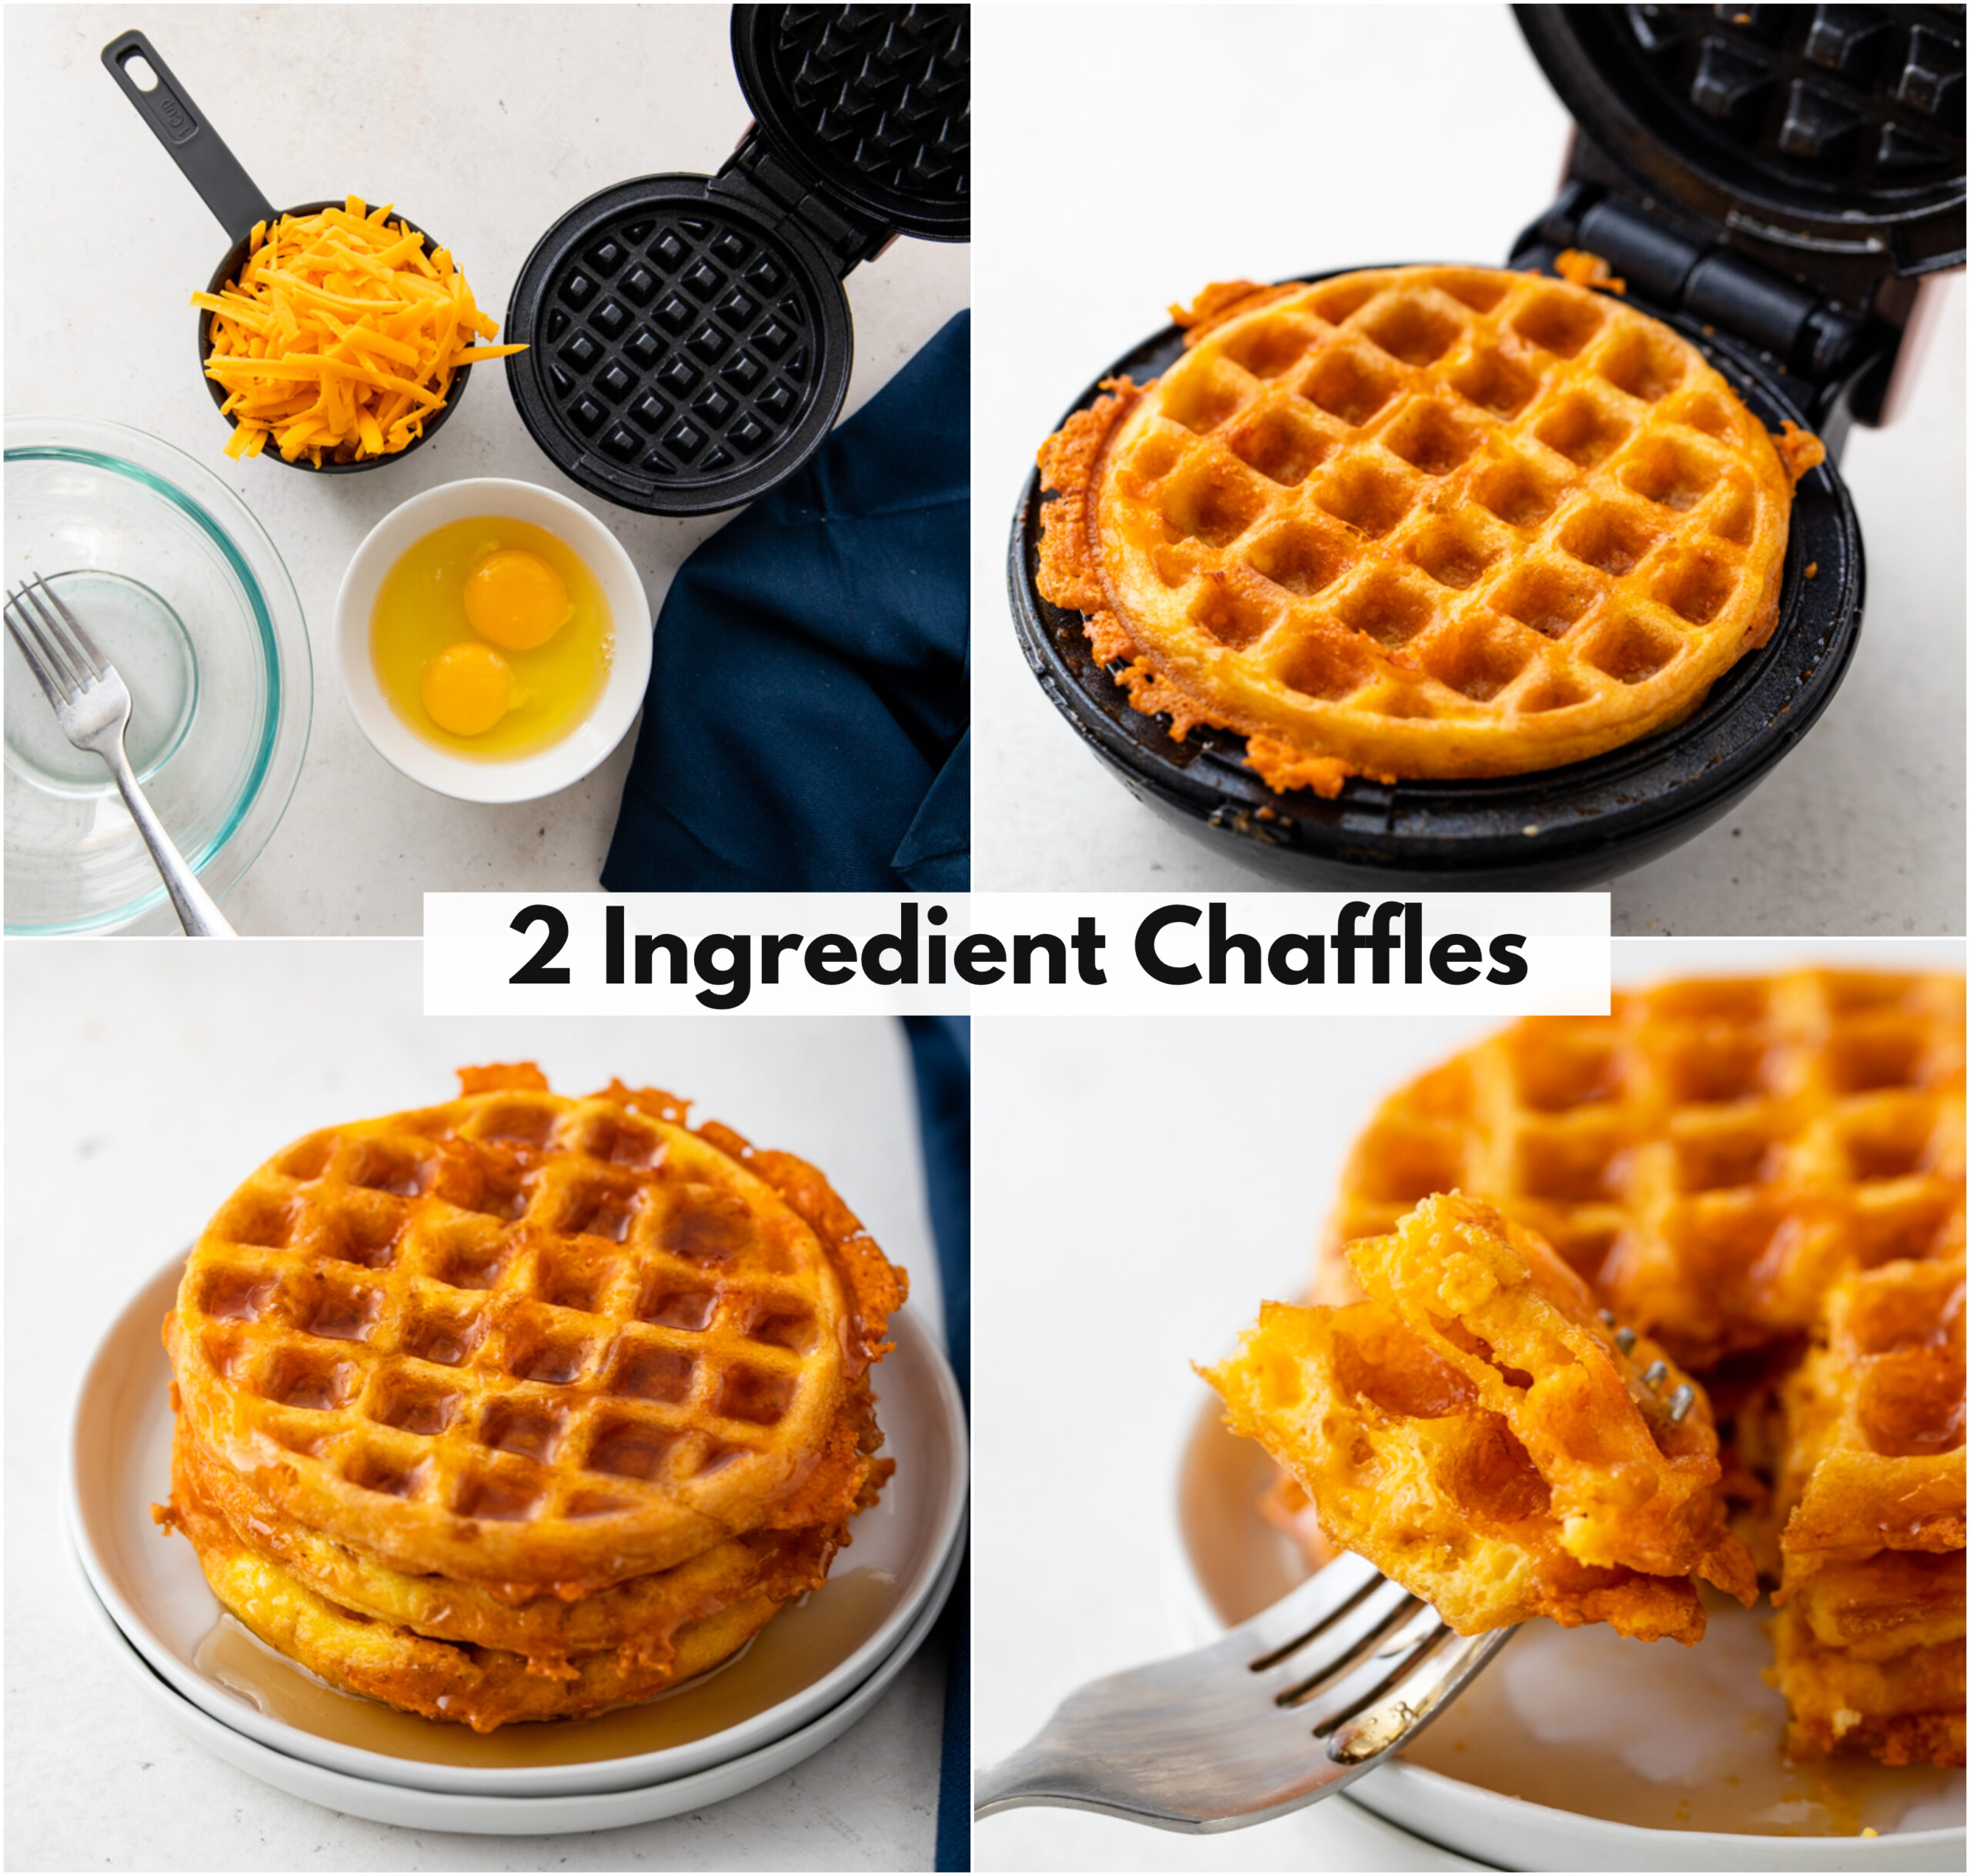 https://gimmedelicious.com/wp-content/uploads/2023/09/2-Ingredient-Chaffles-FB-1-scaled.jpg